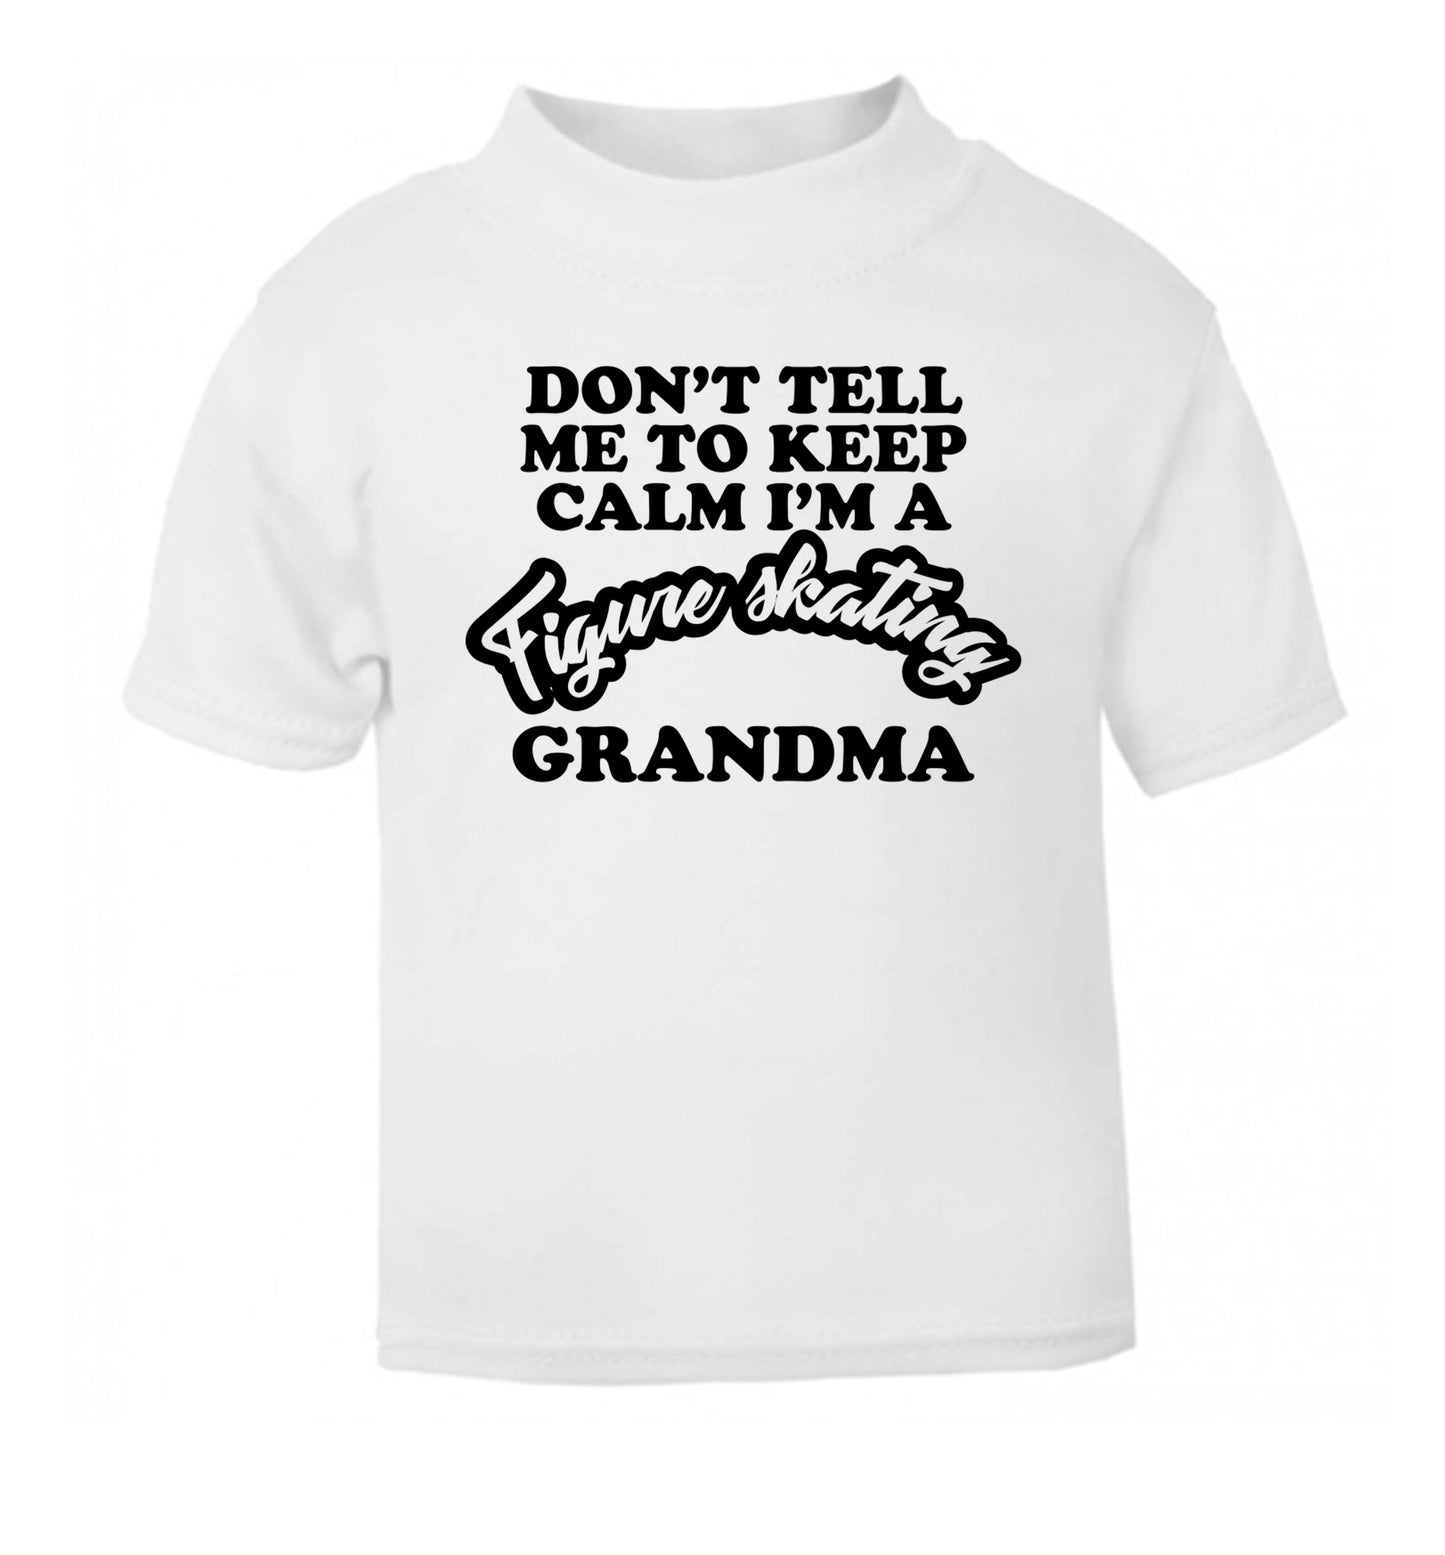 Don't tell me to keep calm I'm a figure skating grandma white Baby Toddler Tshirt 2 Years